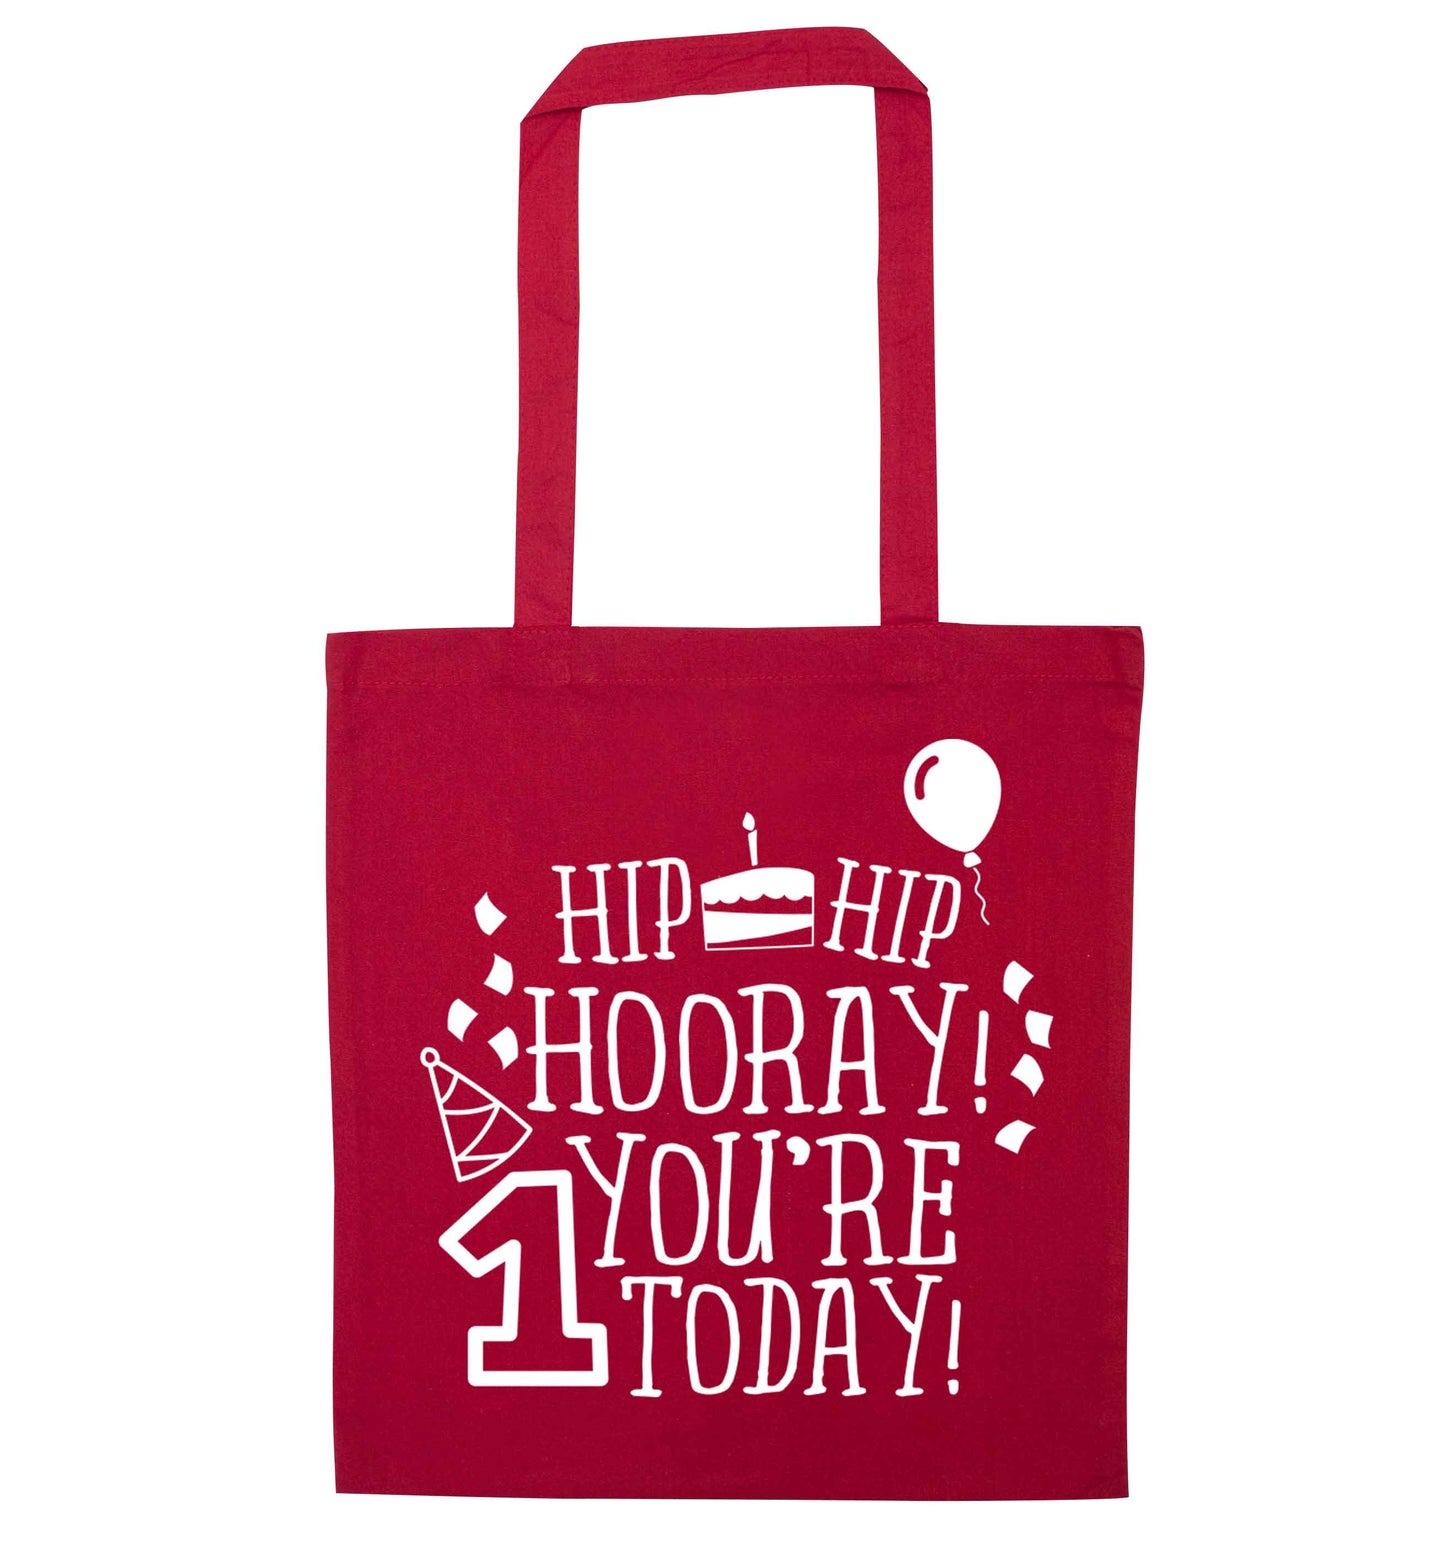 You're one today red tote bag